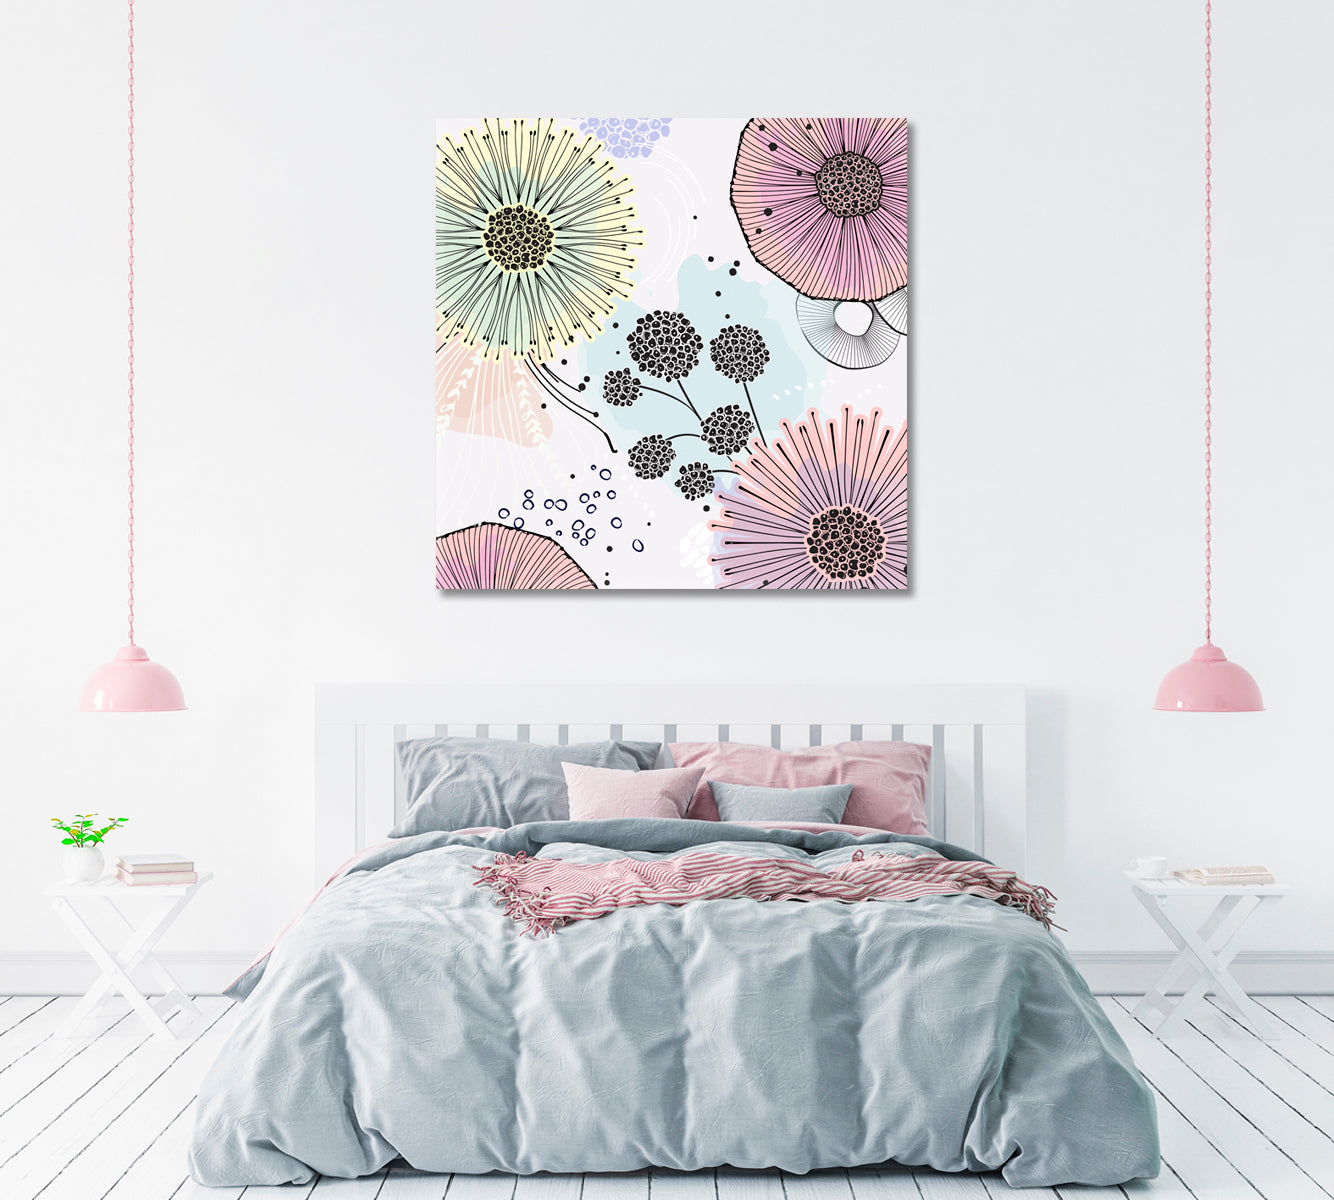 Abstract Contemporary Flowers Canvas Print ArtLexy 1 Panel 12"x12" inches 